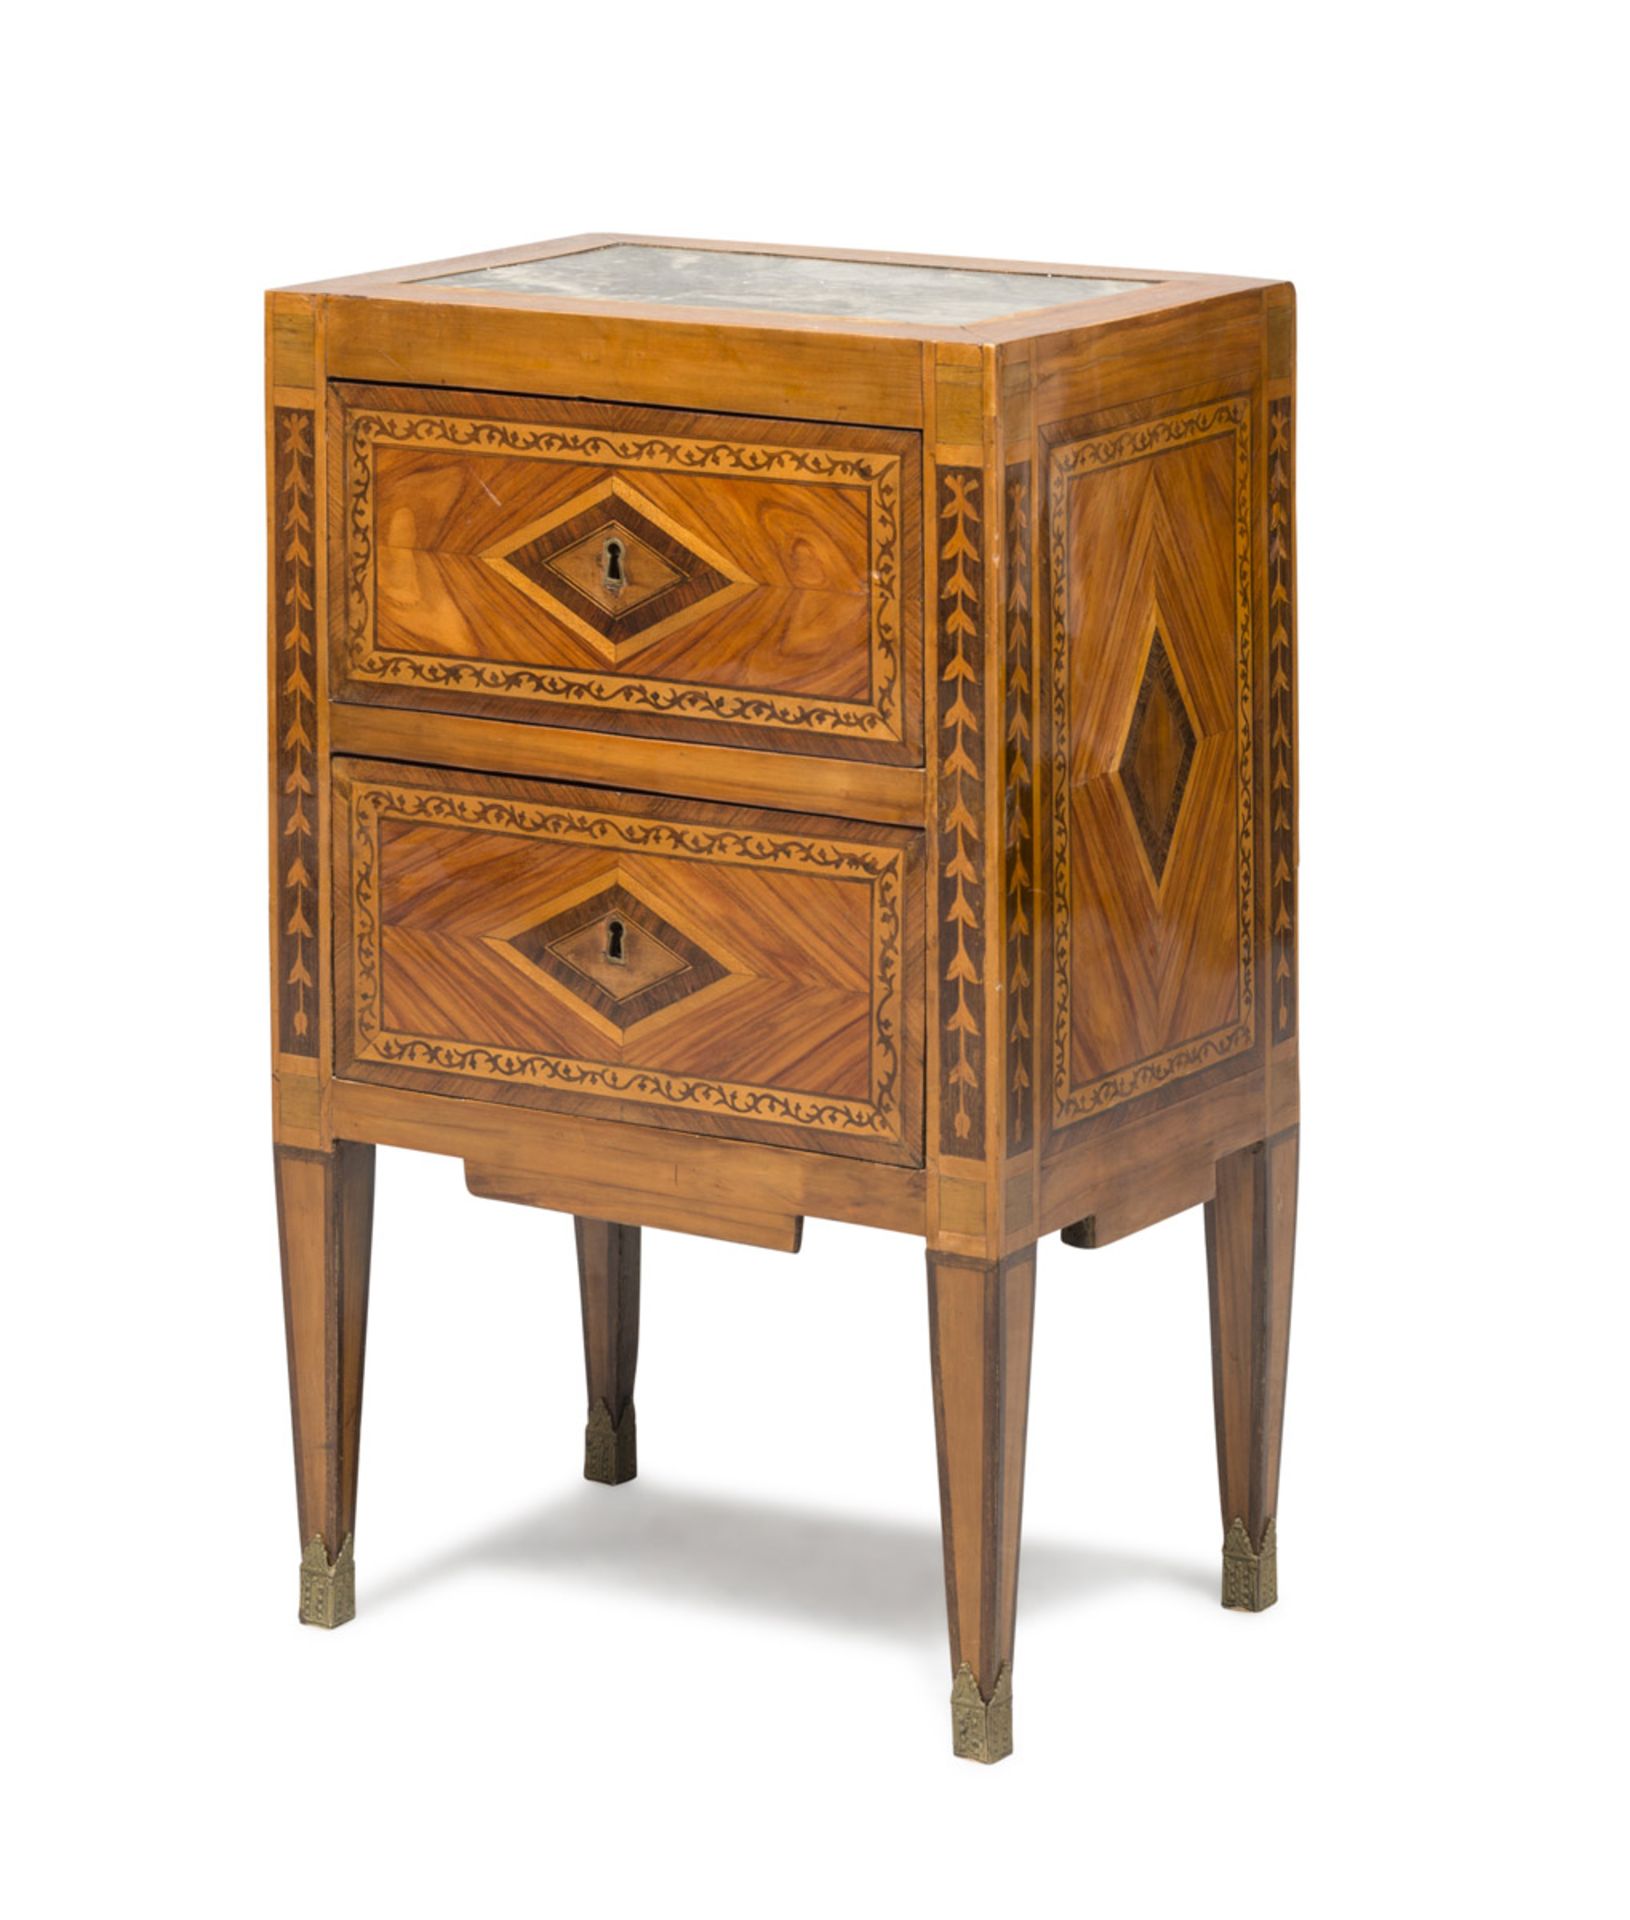 SMALL BEDSIDE IN WALNUT IN BOIS DE ROSE, LOMBARDY FINE 18TH CENTURY with superior top in African